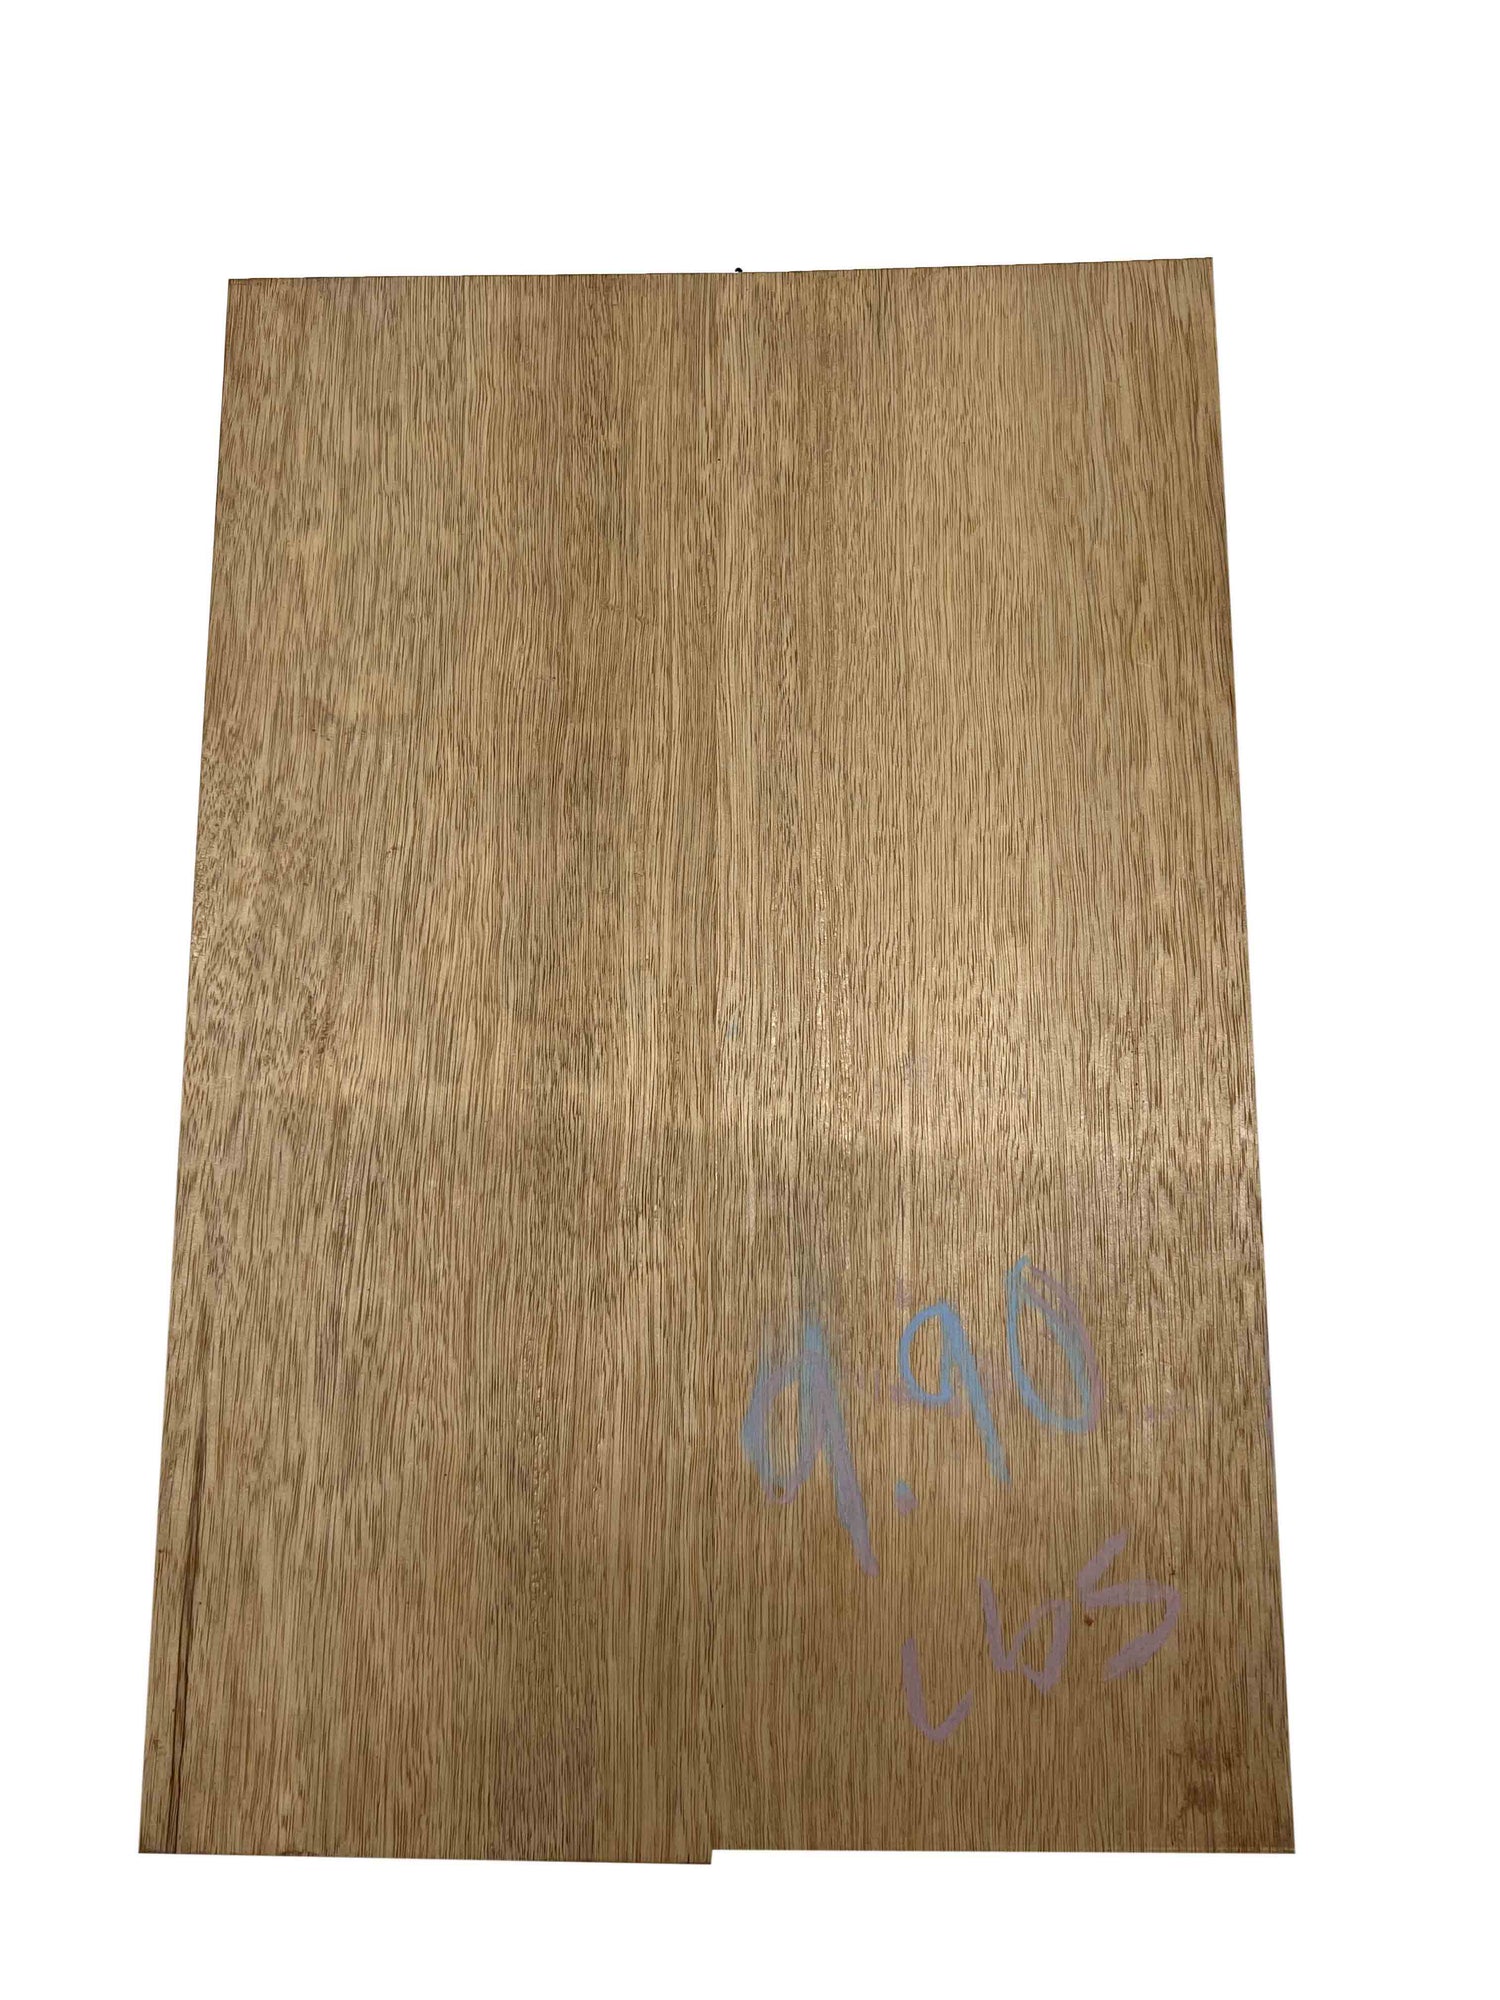 White Limba Electric/Bass Guitar Body Blanks 21&quot; x 14&quot; x 2&quot; - Exotic Wood Zone - Buy online Across USA 